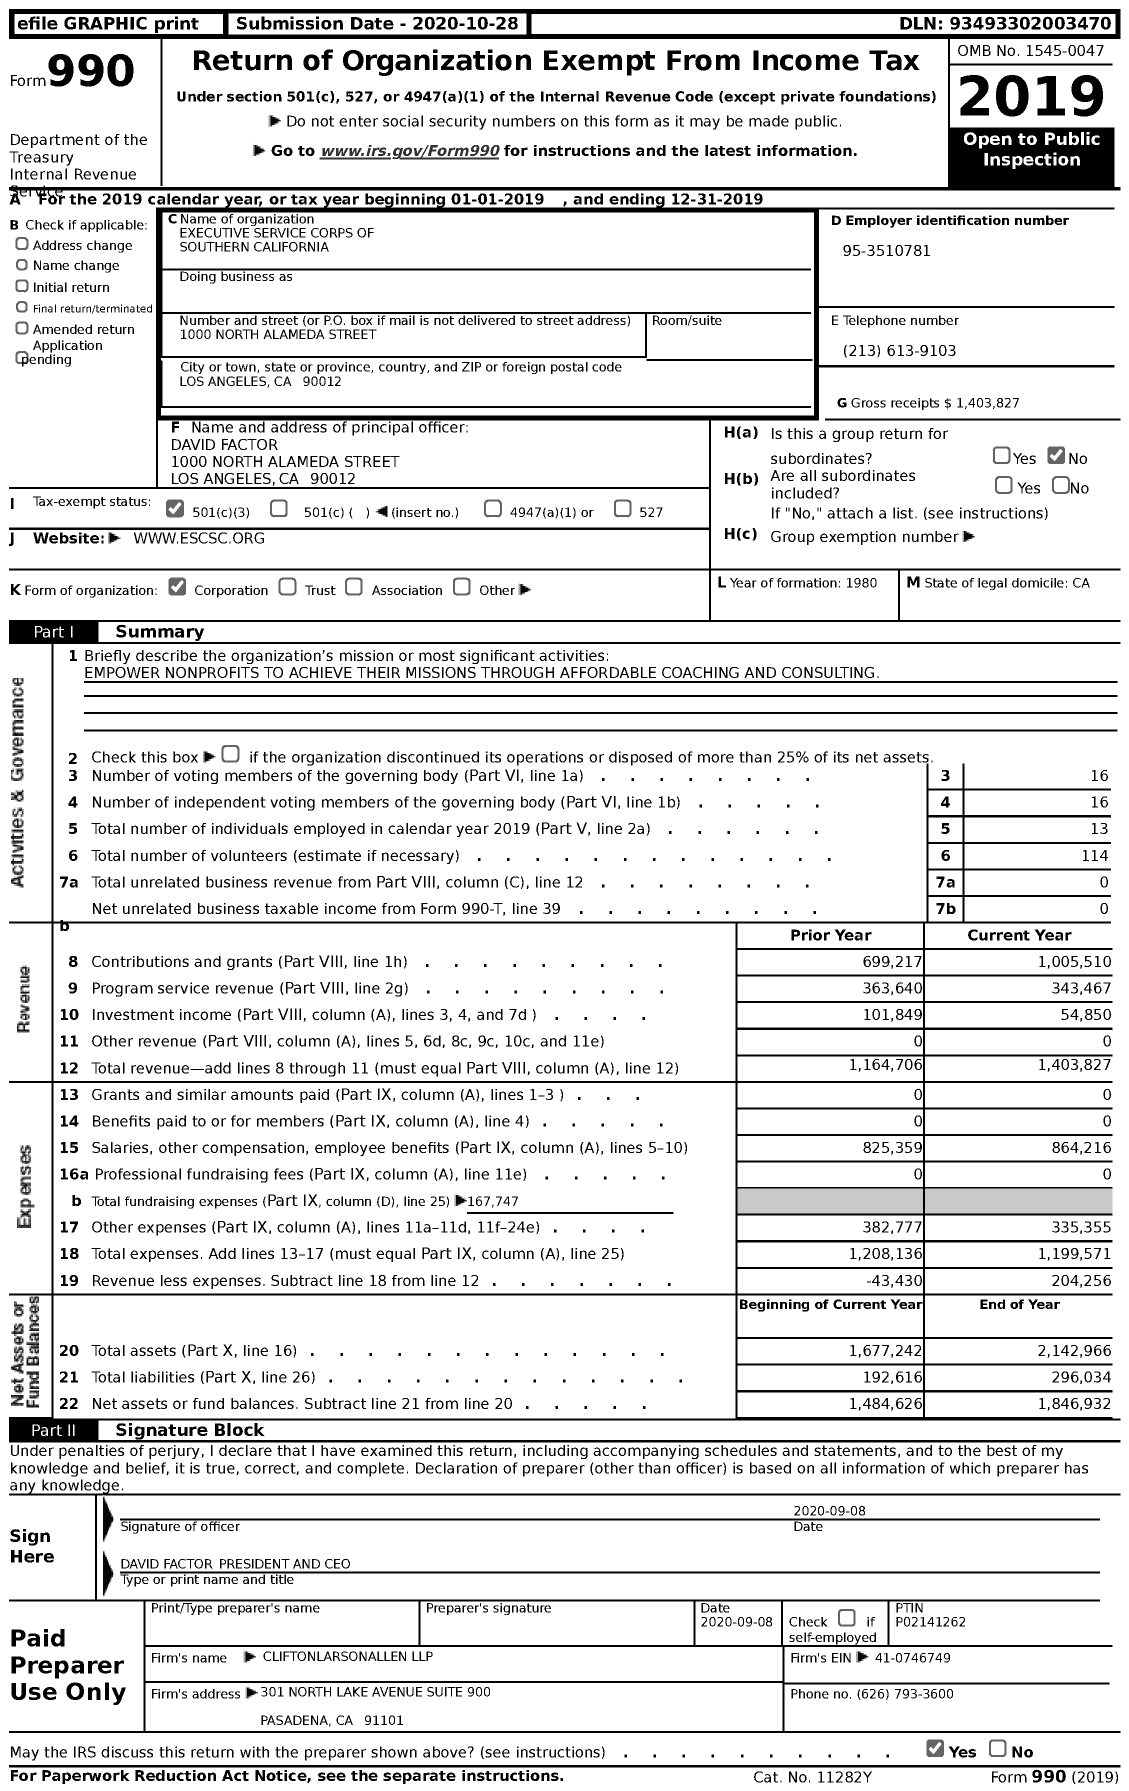 Image of first page of 2019 Form 990 for Executive Service Corps of Southern CALIFORNIA